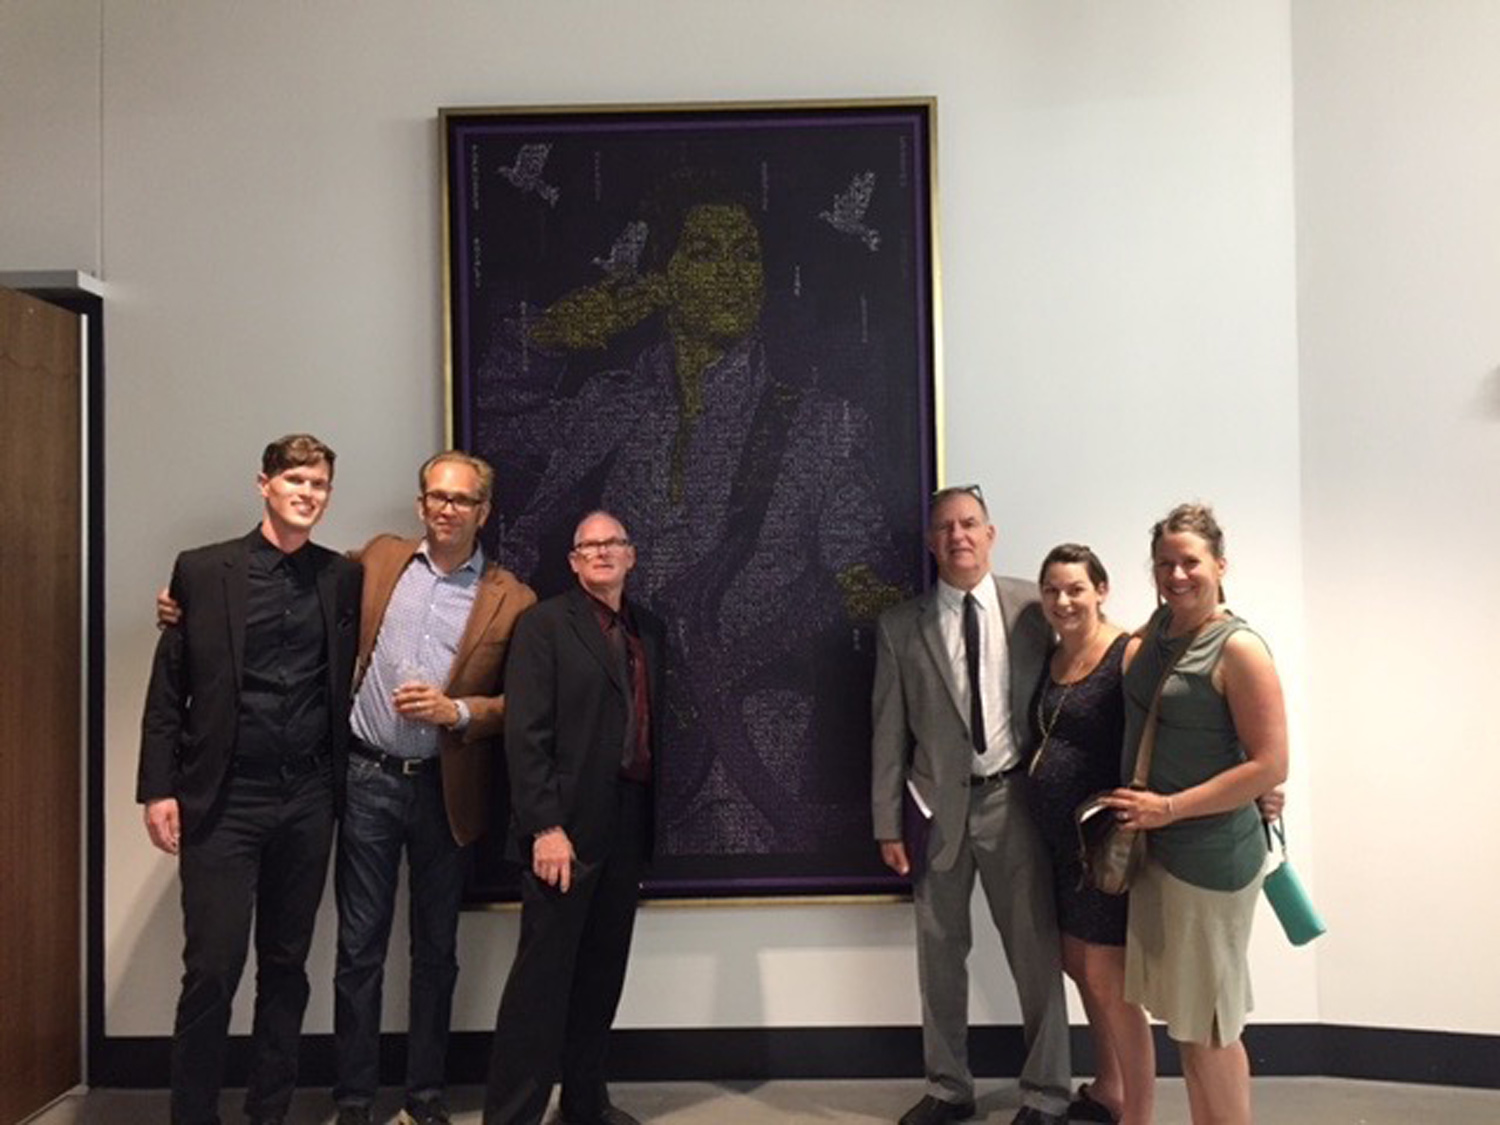  The Hang It crew at the art opening for the US Bank Stadium - standing in front of the Prince piece that we stretched and framed. 